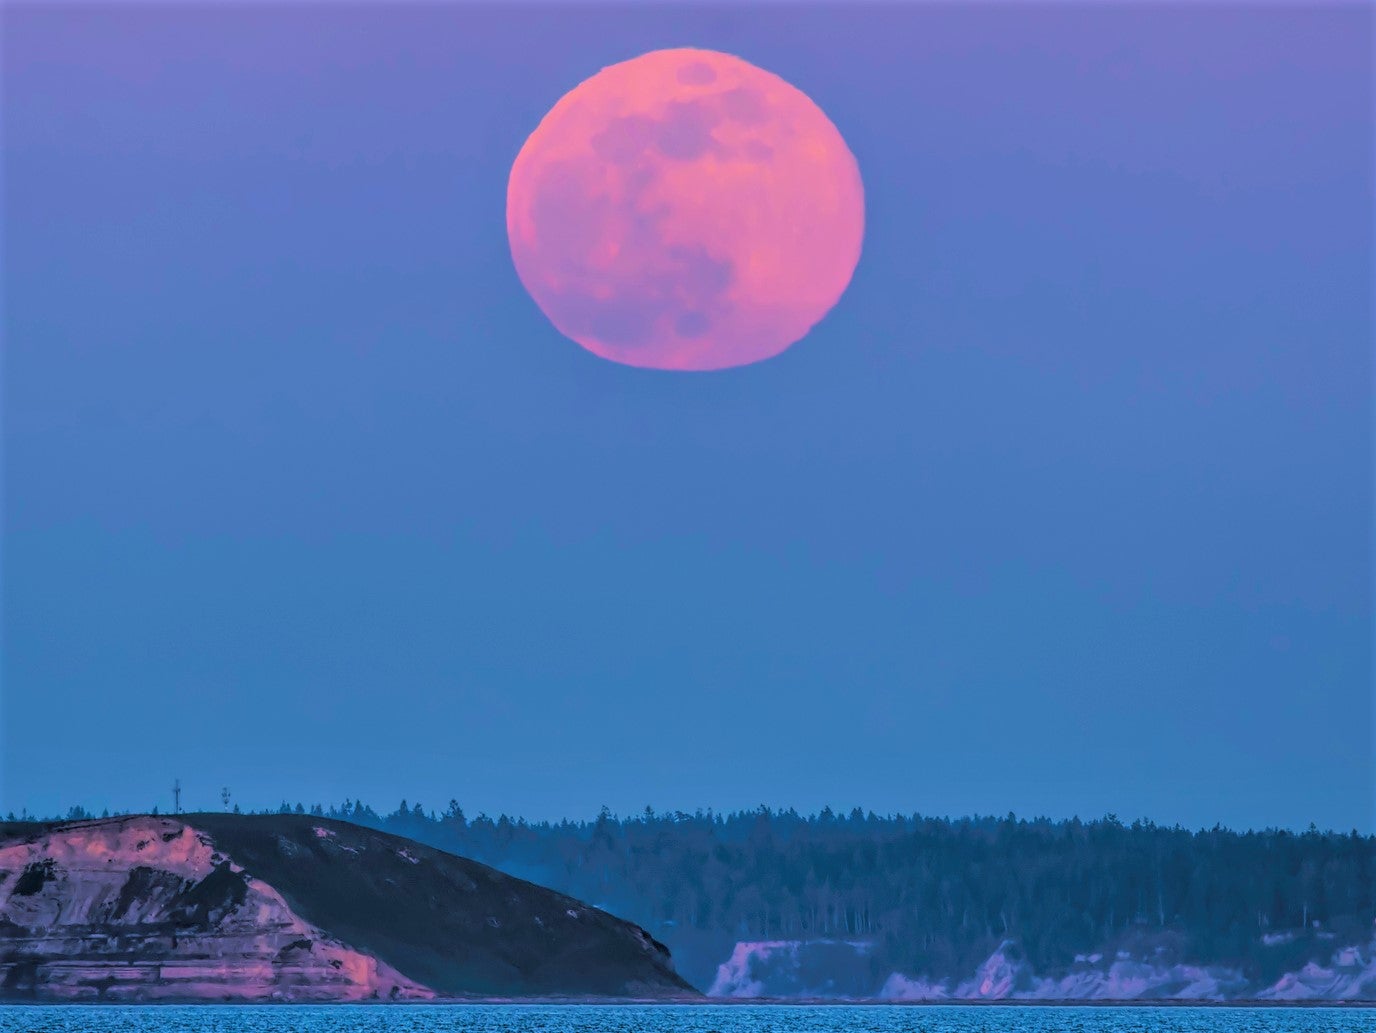 Pink supermoon rising over Protection Island Puget Sound, Strati of Juan de Fuca. This month’s full moon falls on 16 April, 2022